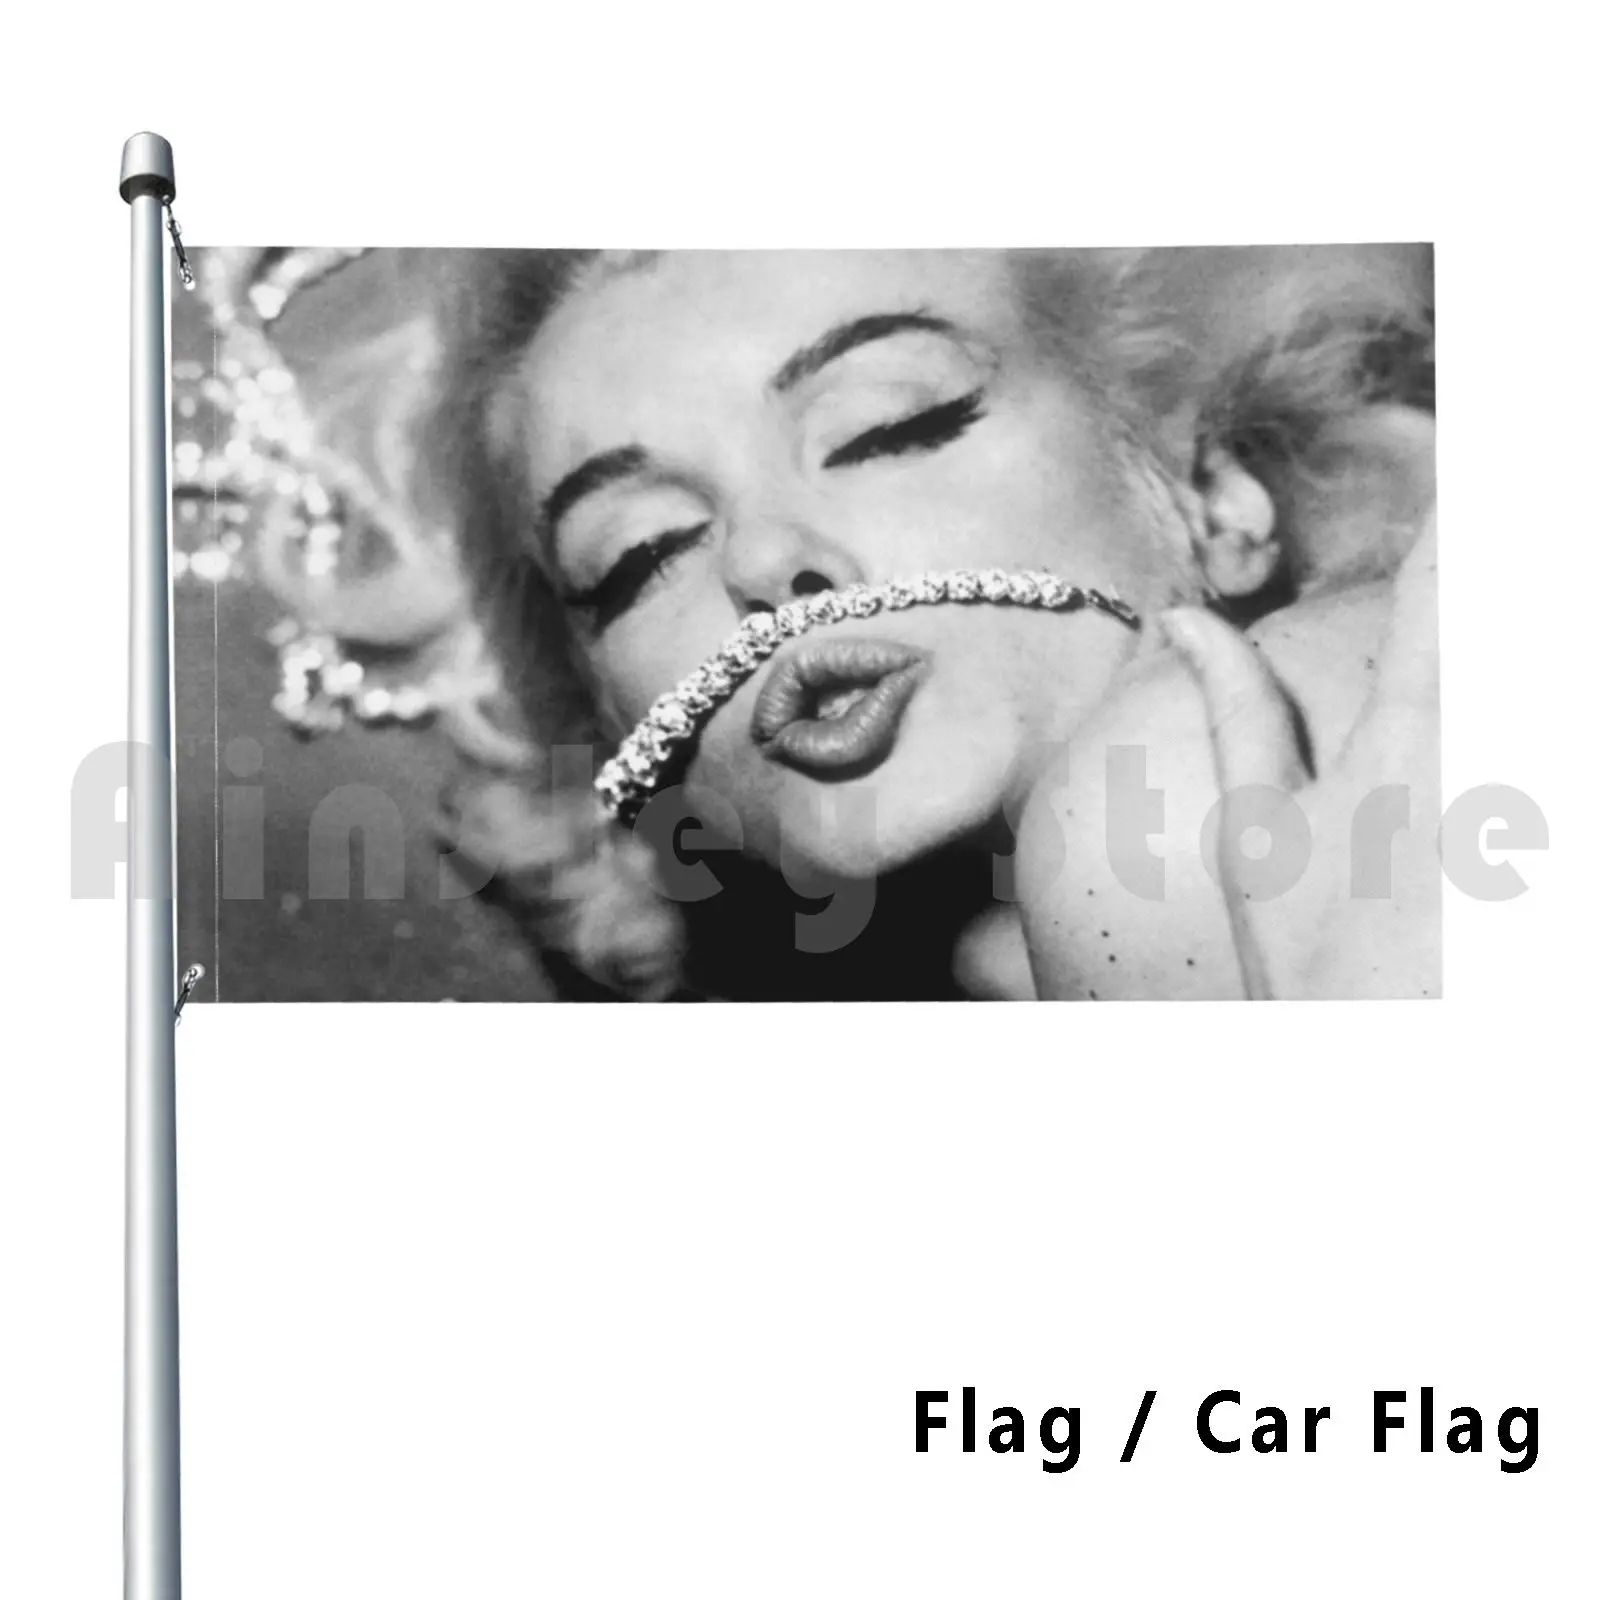 

Marilyn Monroe Vintage Diamonds Are A Girls Best Friend Retro Black And White 1950s Flag Car Flag Funny